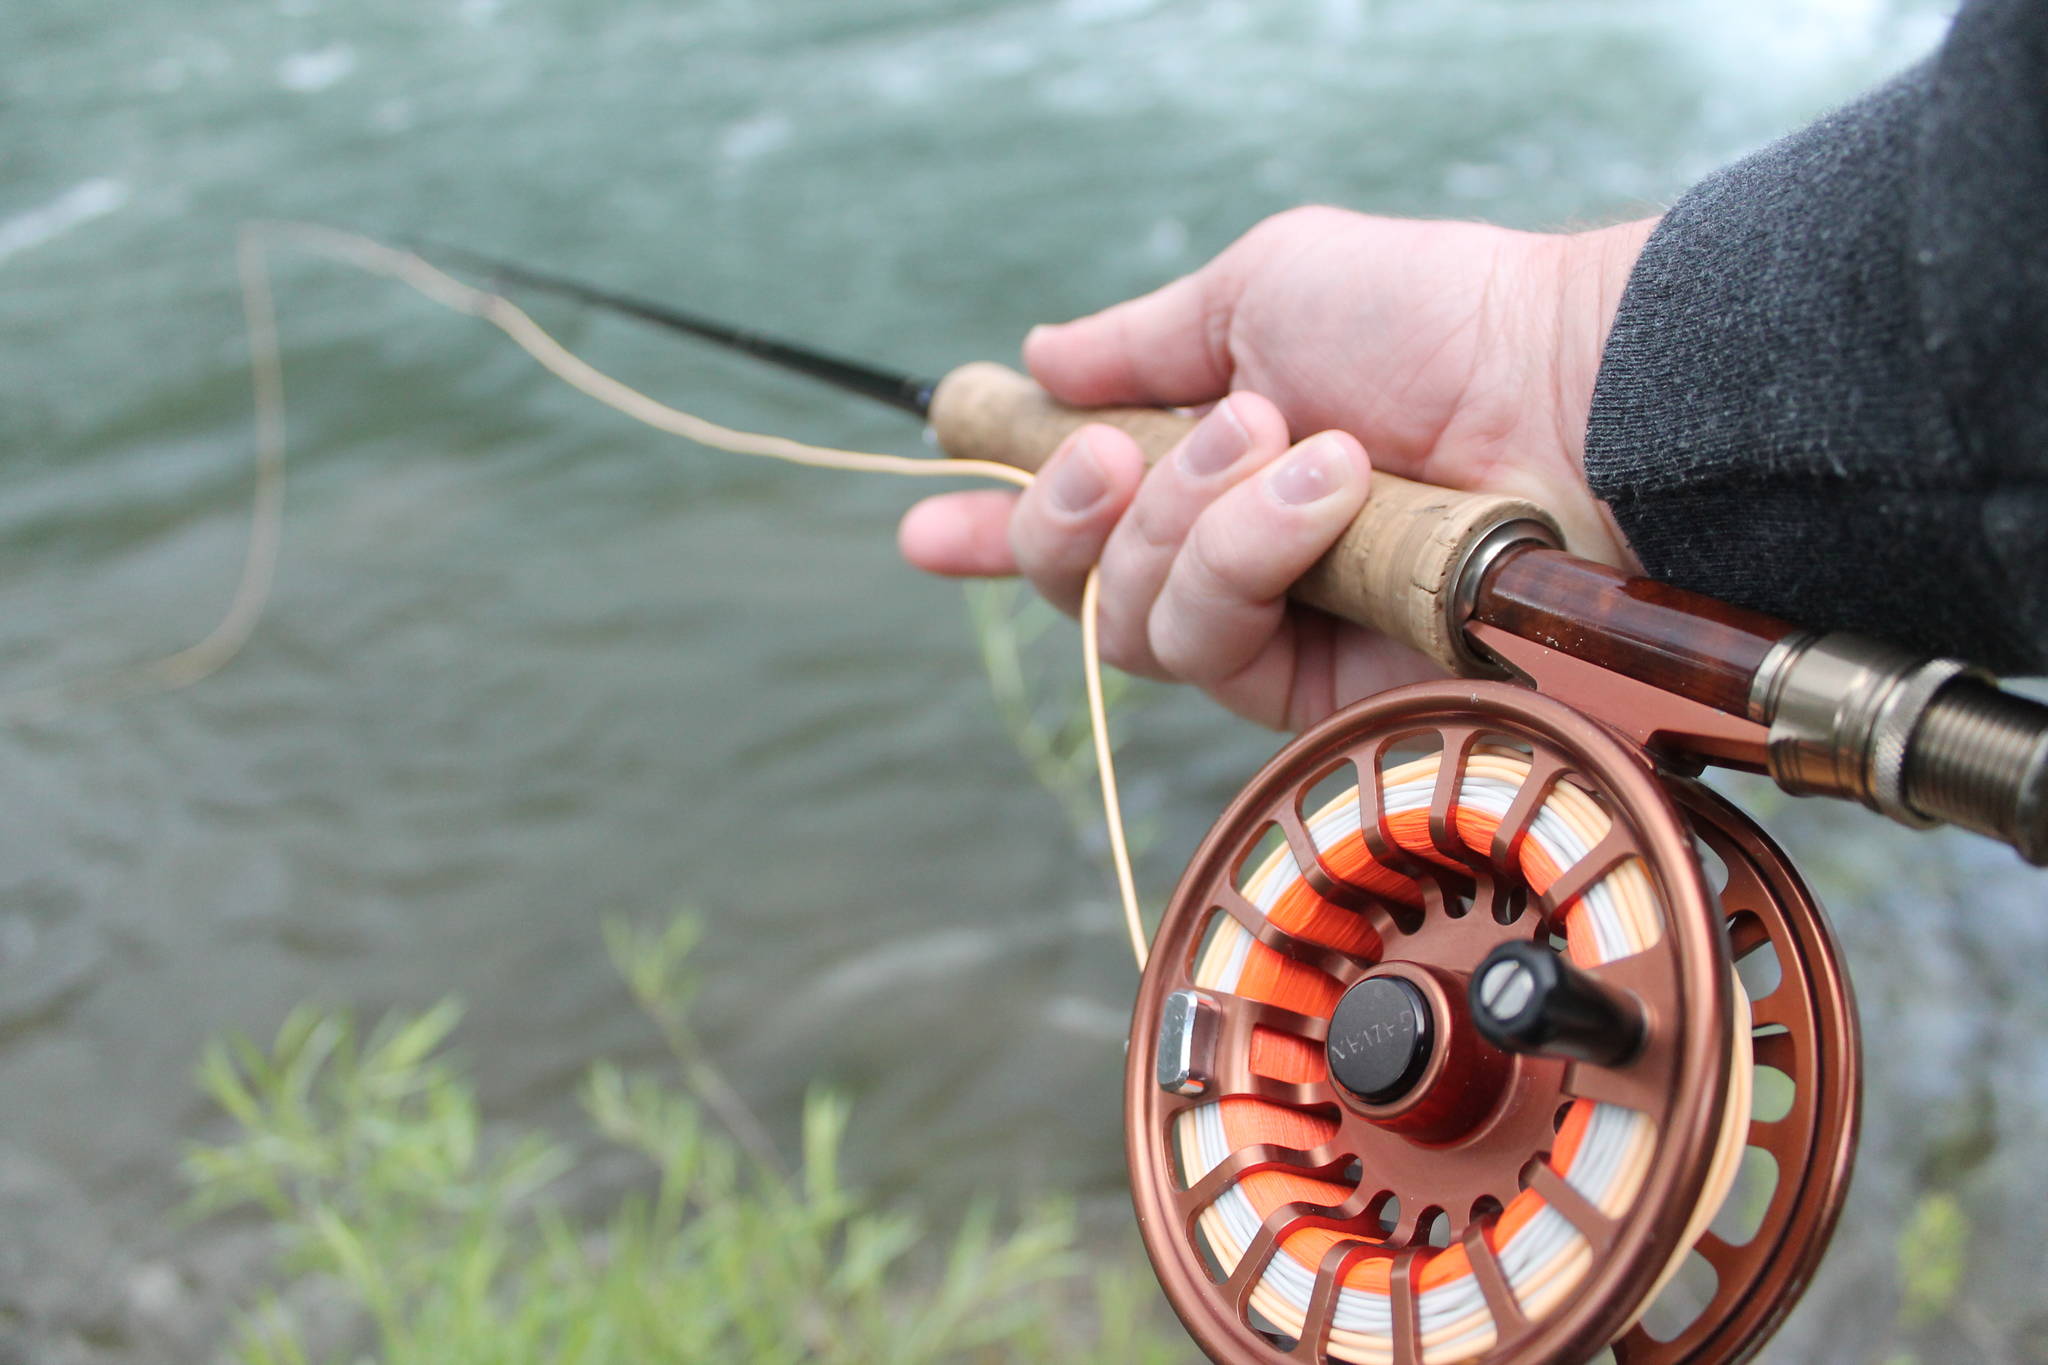 The author can’t tell a cheap suit from an expensive one, but knows a good rod and reel combo when he sees one. (Jeff Lund | For the Juneau Empire)